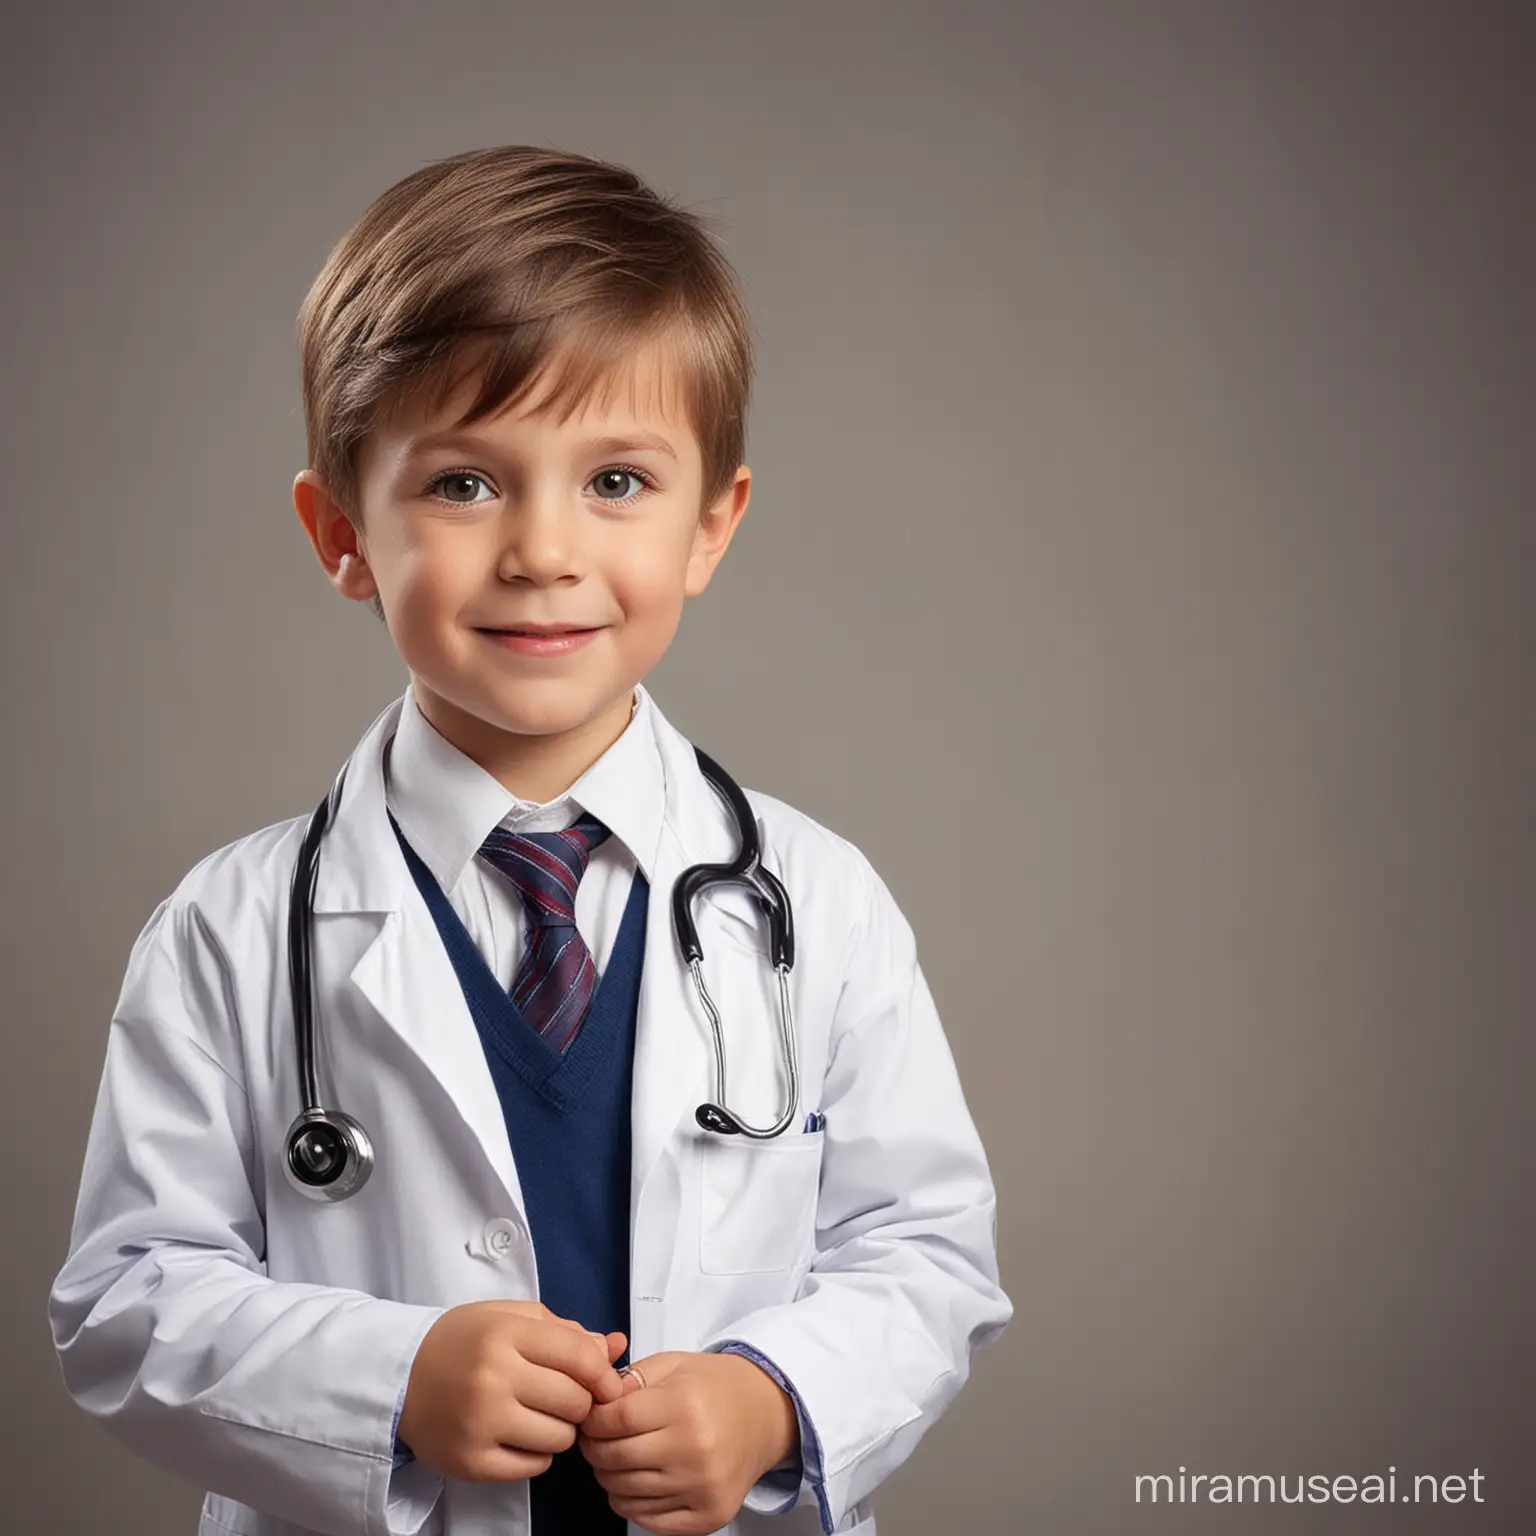 Aspiring Young Doctor Little Boy Dreaming of a Medical Career